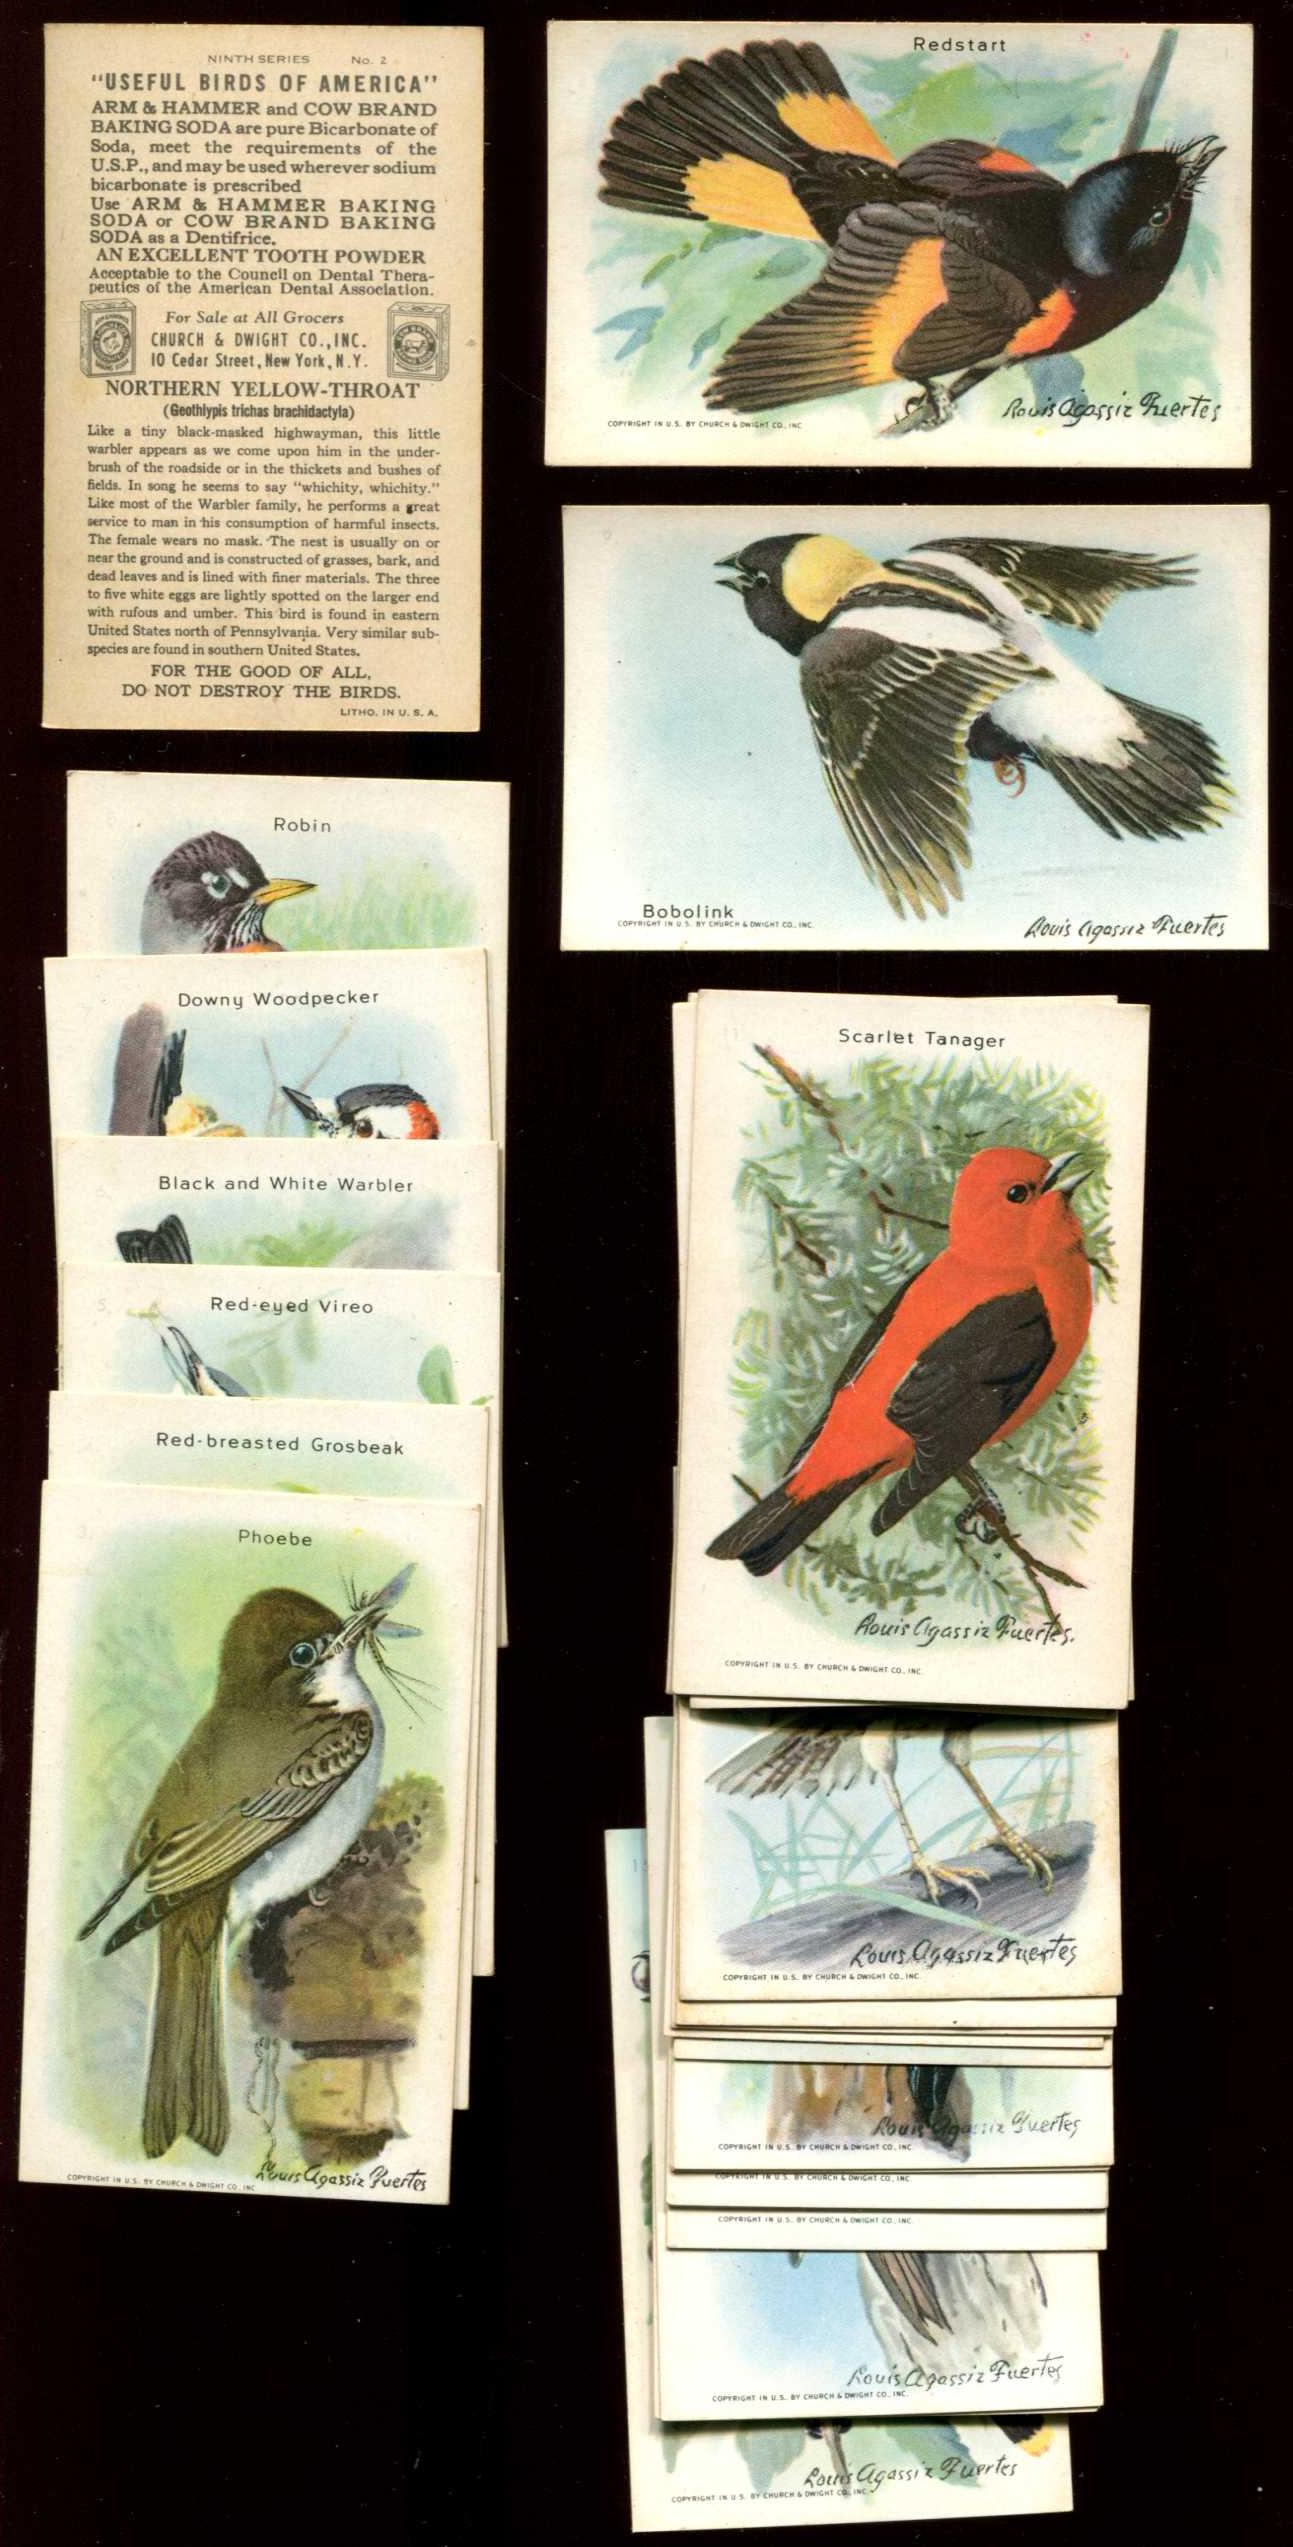 1920's-1930's Church & Dwight Co. - Lot of (29) USEFUL BIRDS n cards value